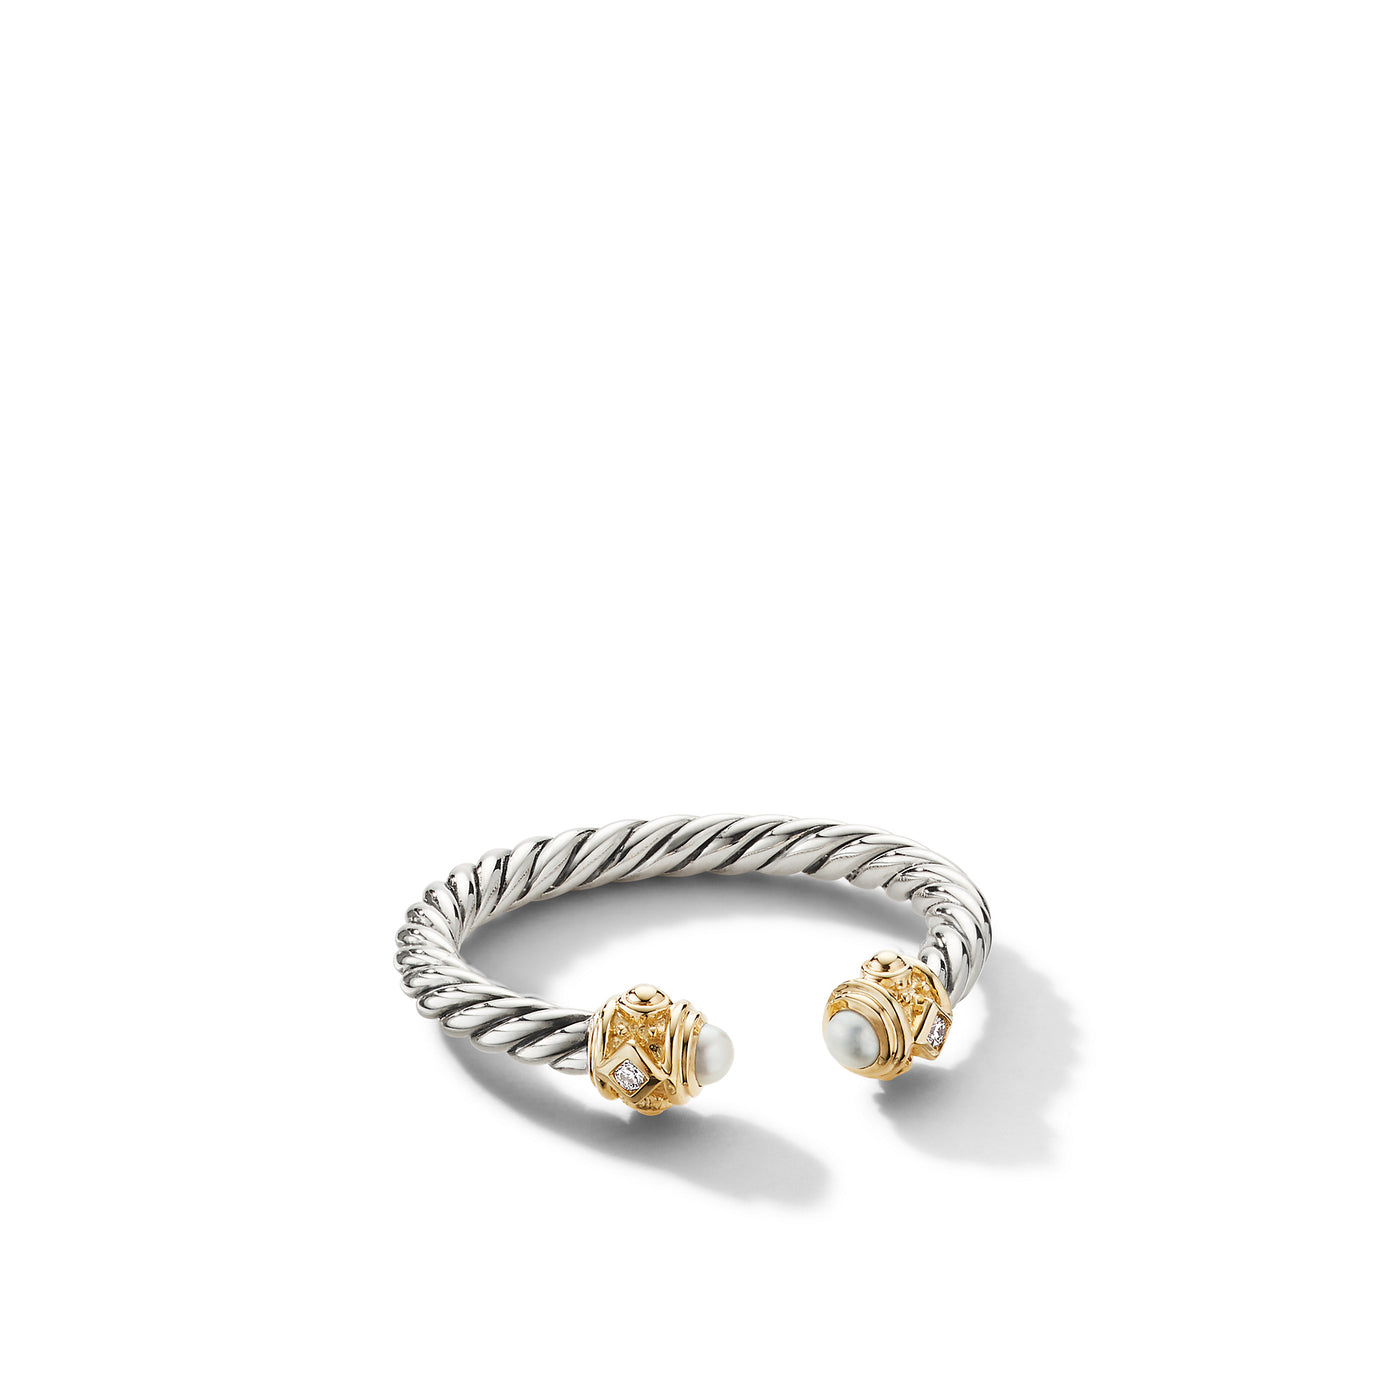 Renaissance Ring in Sterling Silver with 14K Yellow Gold\, Pearls and Diamonds\, 2.3mm